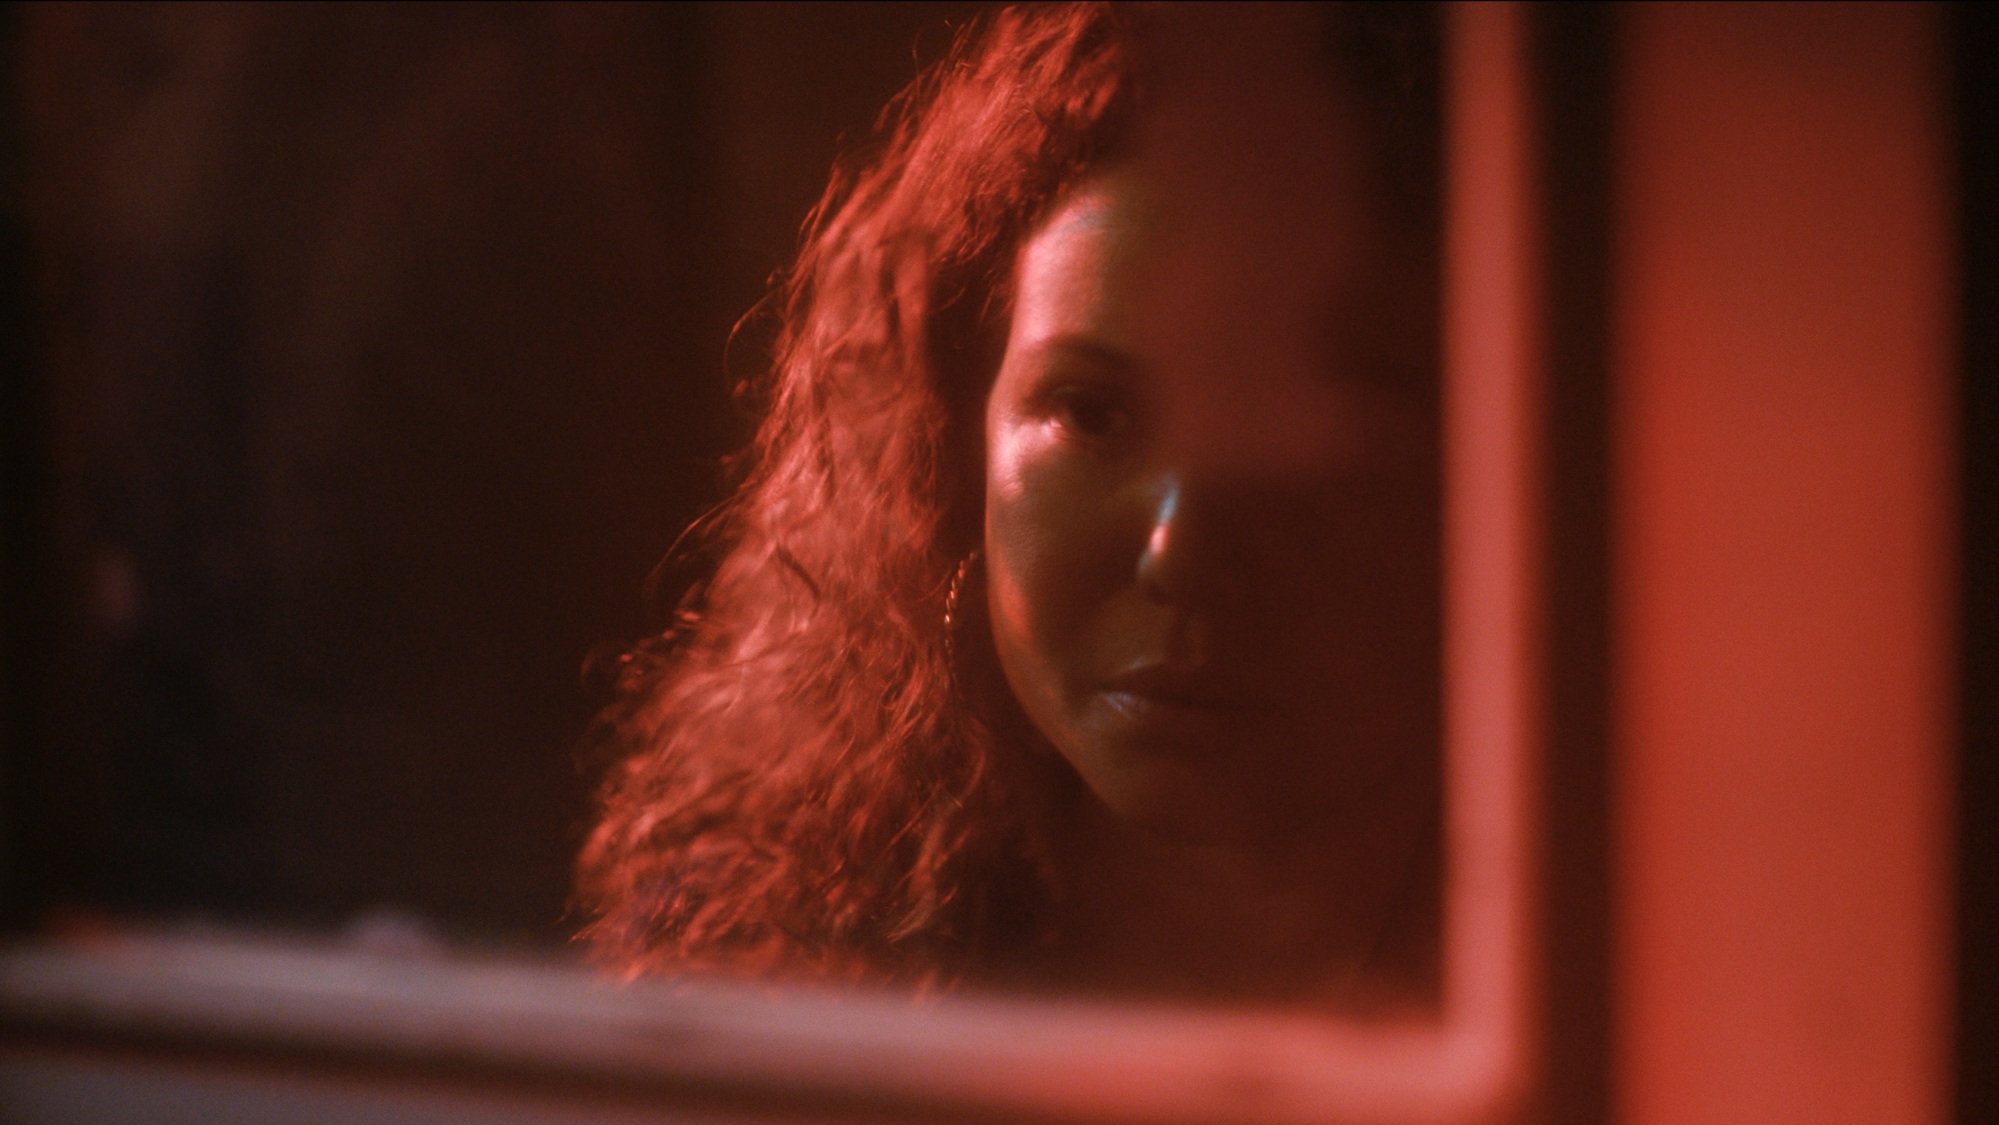 A woman bathed in red light looks through a window.